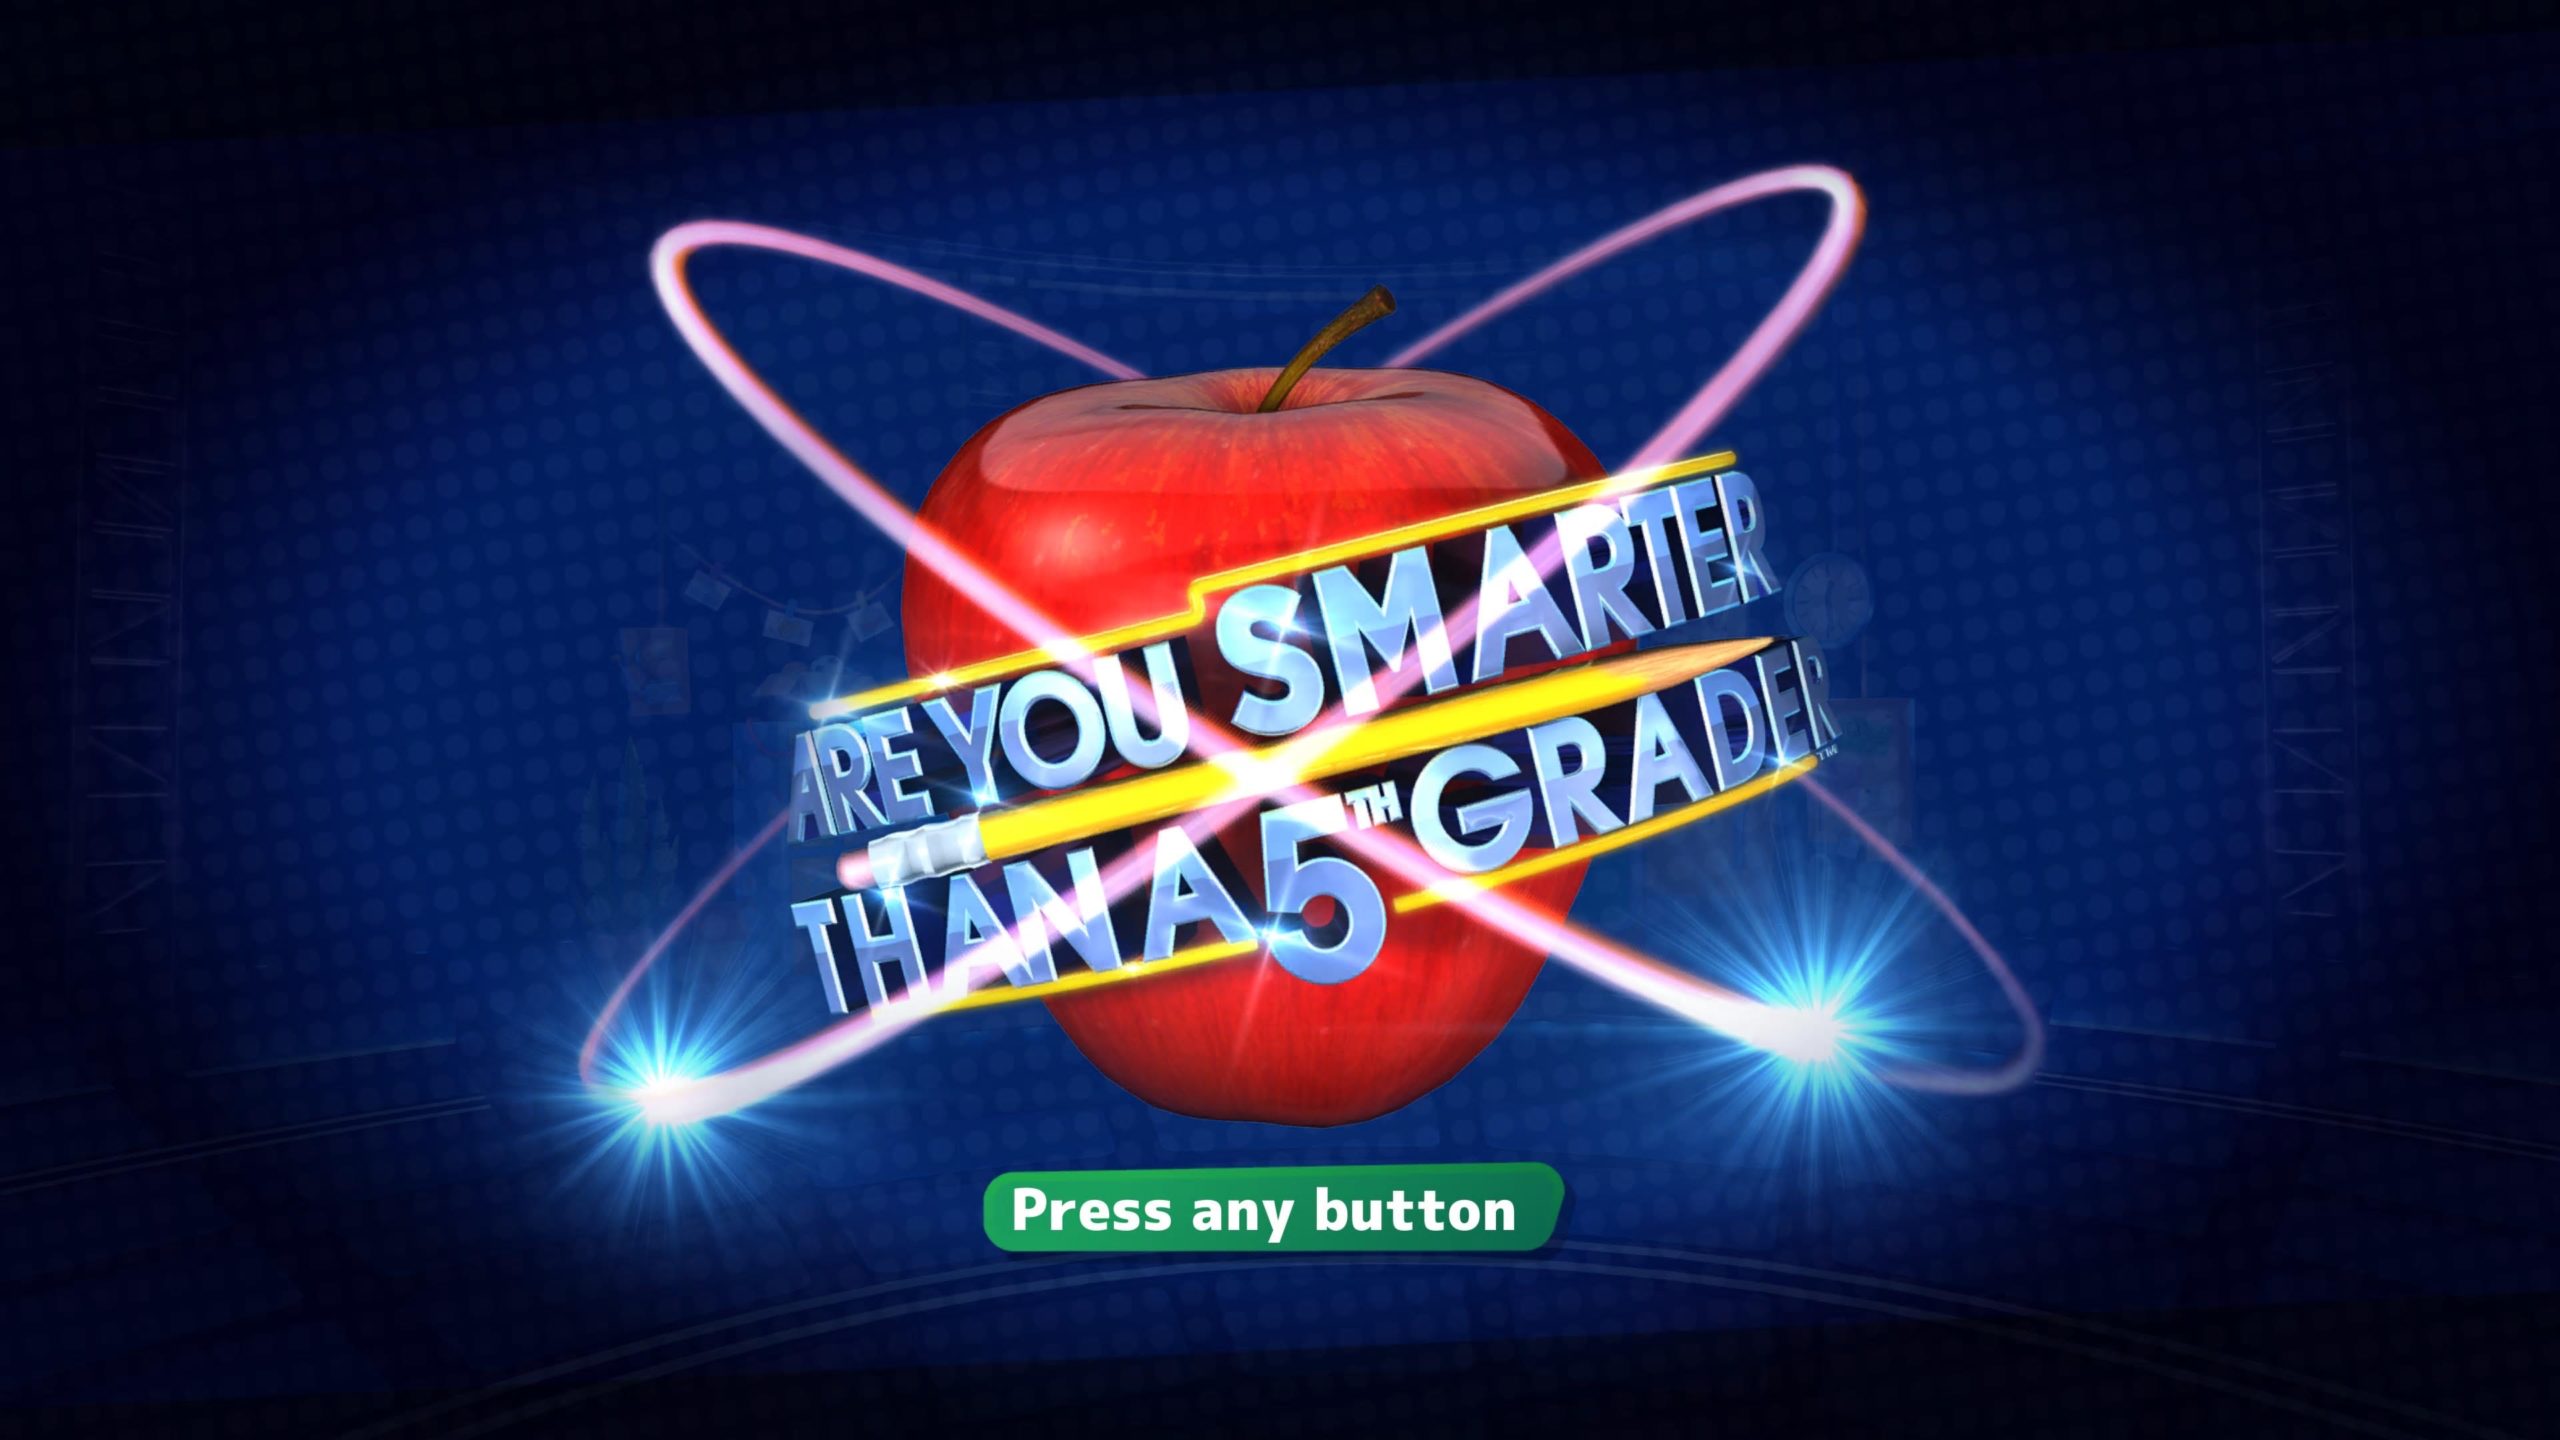 Тайтлы 2022. Are you Smarter than a 5th grader game time Xbox 360 обложка. Are you Smarter than a 5th grader? Show.